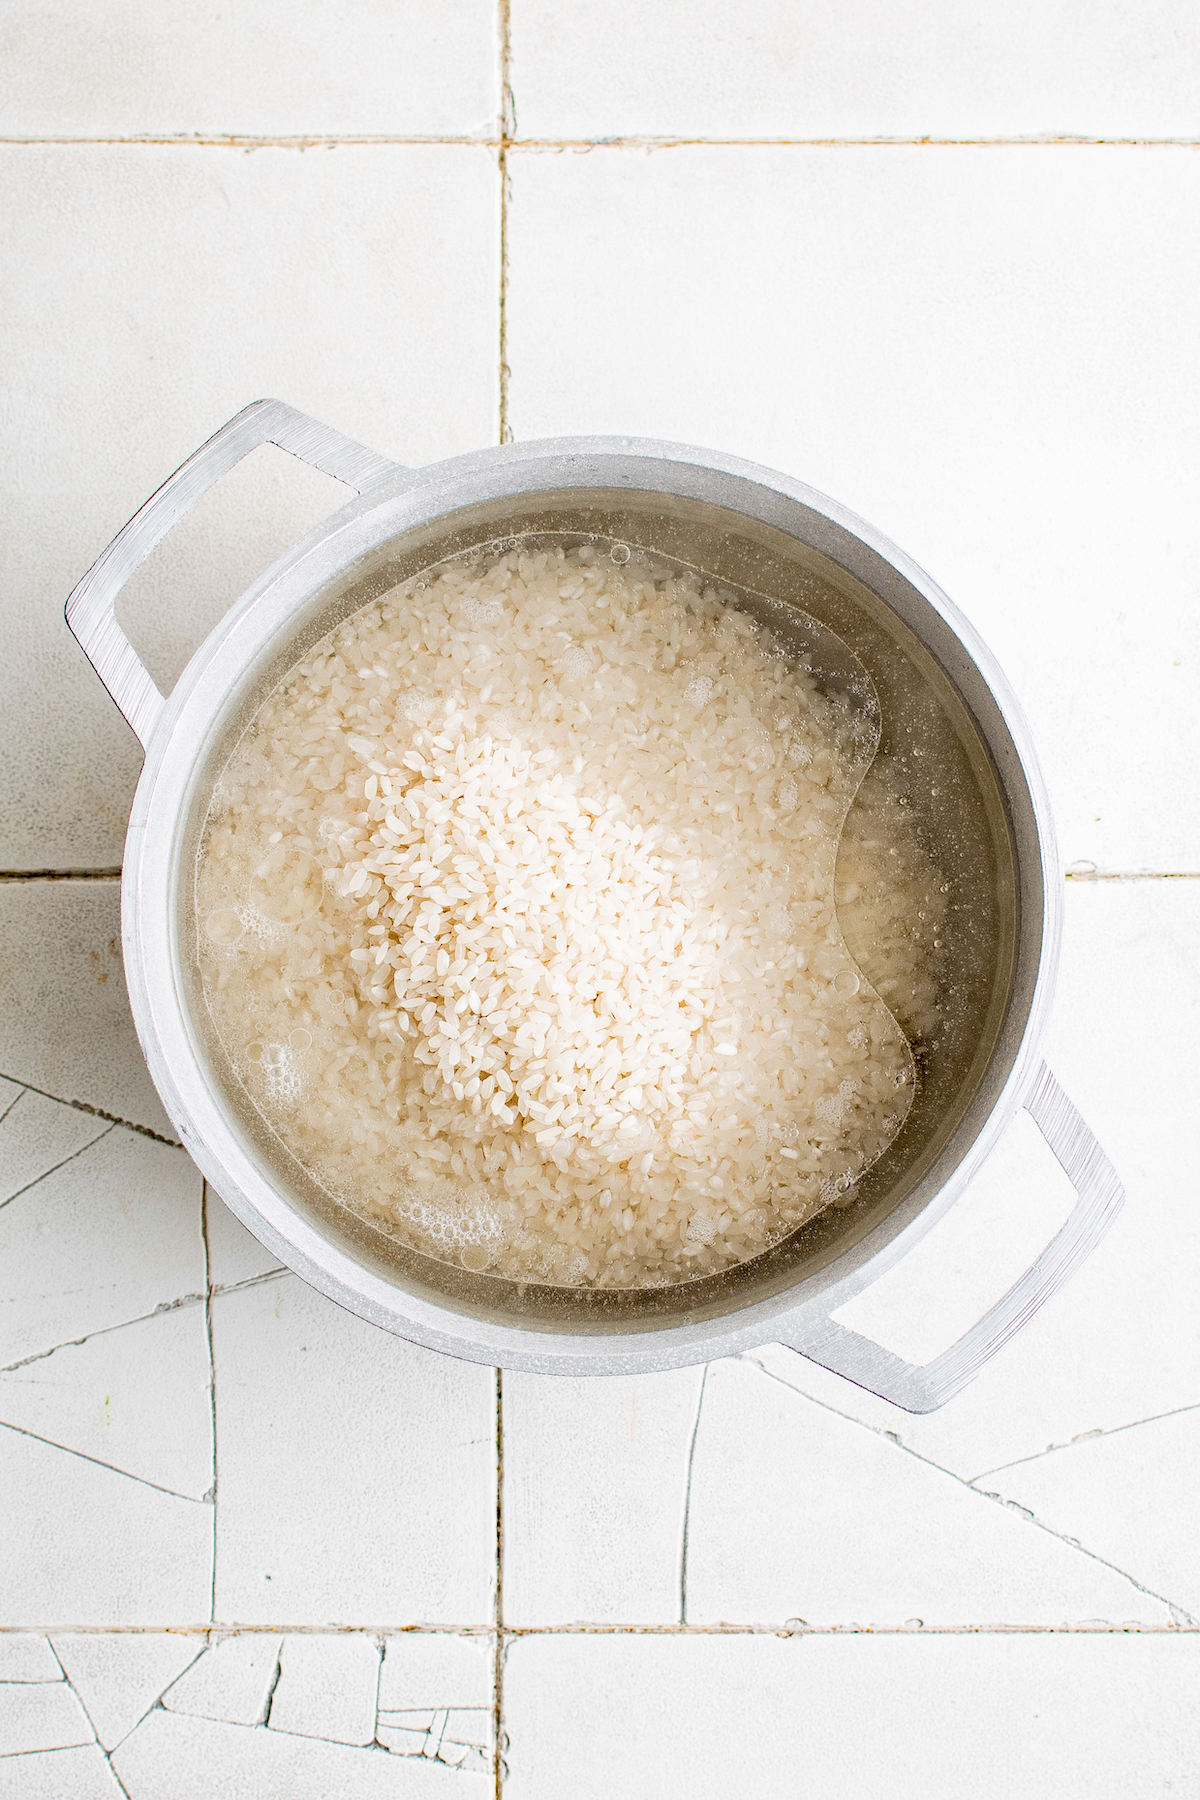 water and rice in a large cooking pot